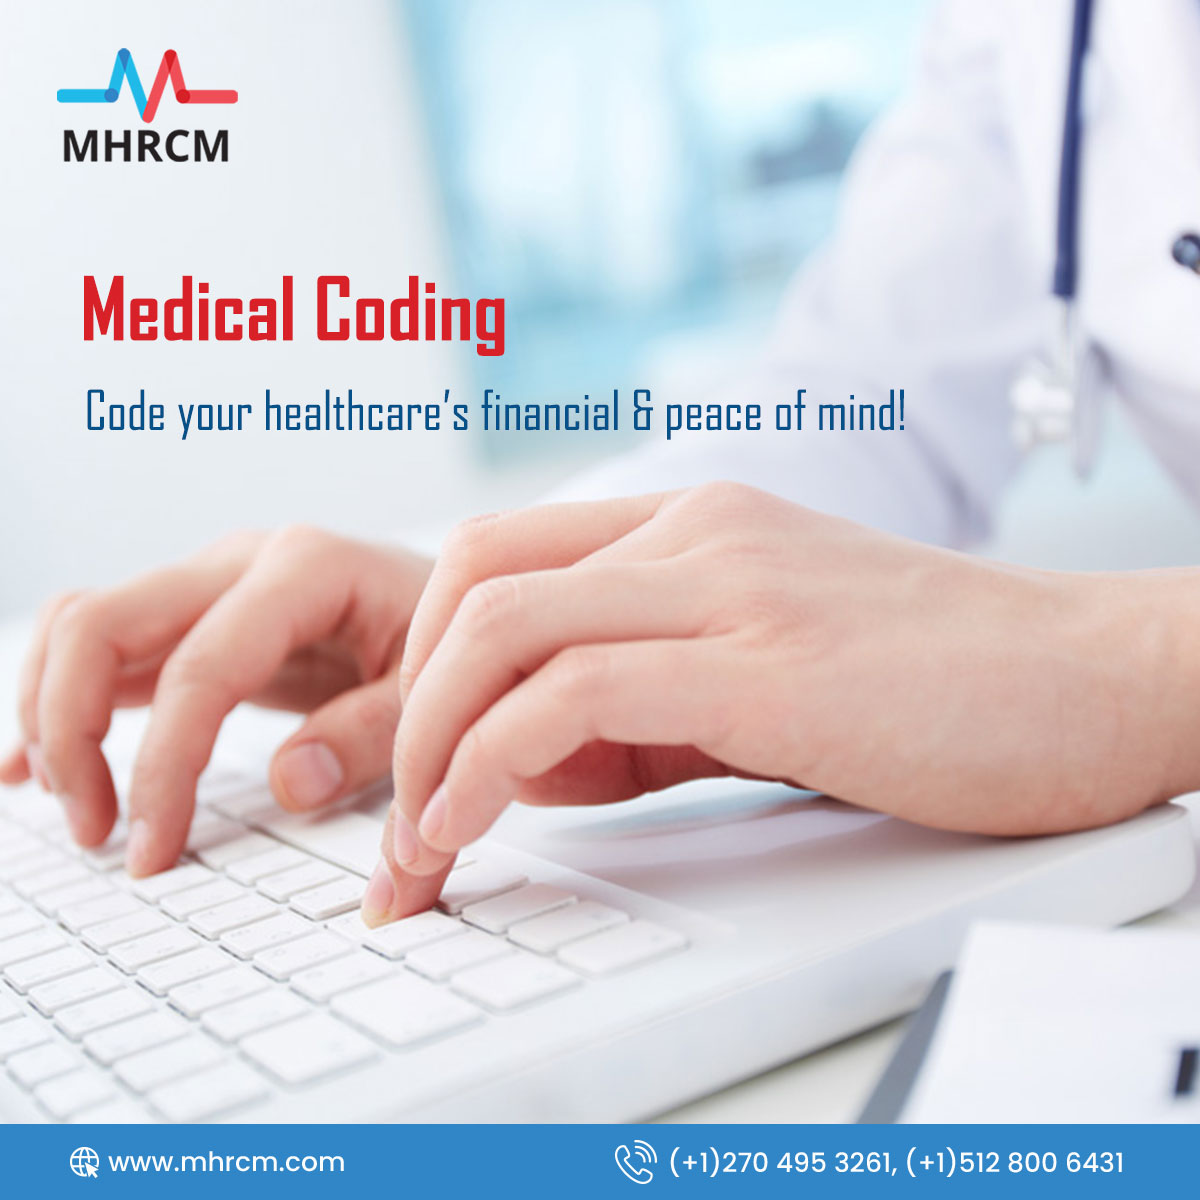 Streamline billing and boost revenue. Expert Medical Coding: Accurate & compliant for peace of mind. Try us today!

#medicalcoding #medicalcoders #medicalbilling #medicalbills #medicalbillingcompany #billingexperts #rcmservices #healthcare #rcmoutsourcing #rcm #mhrcm